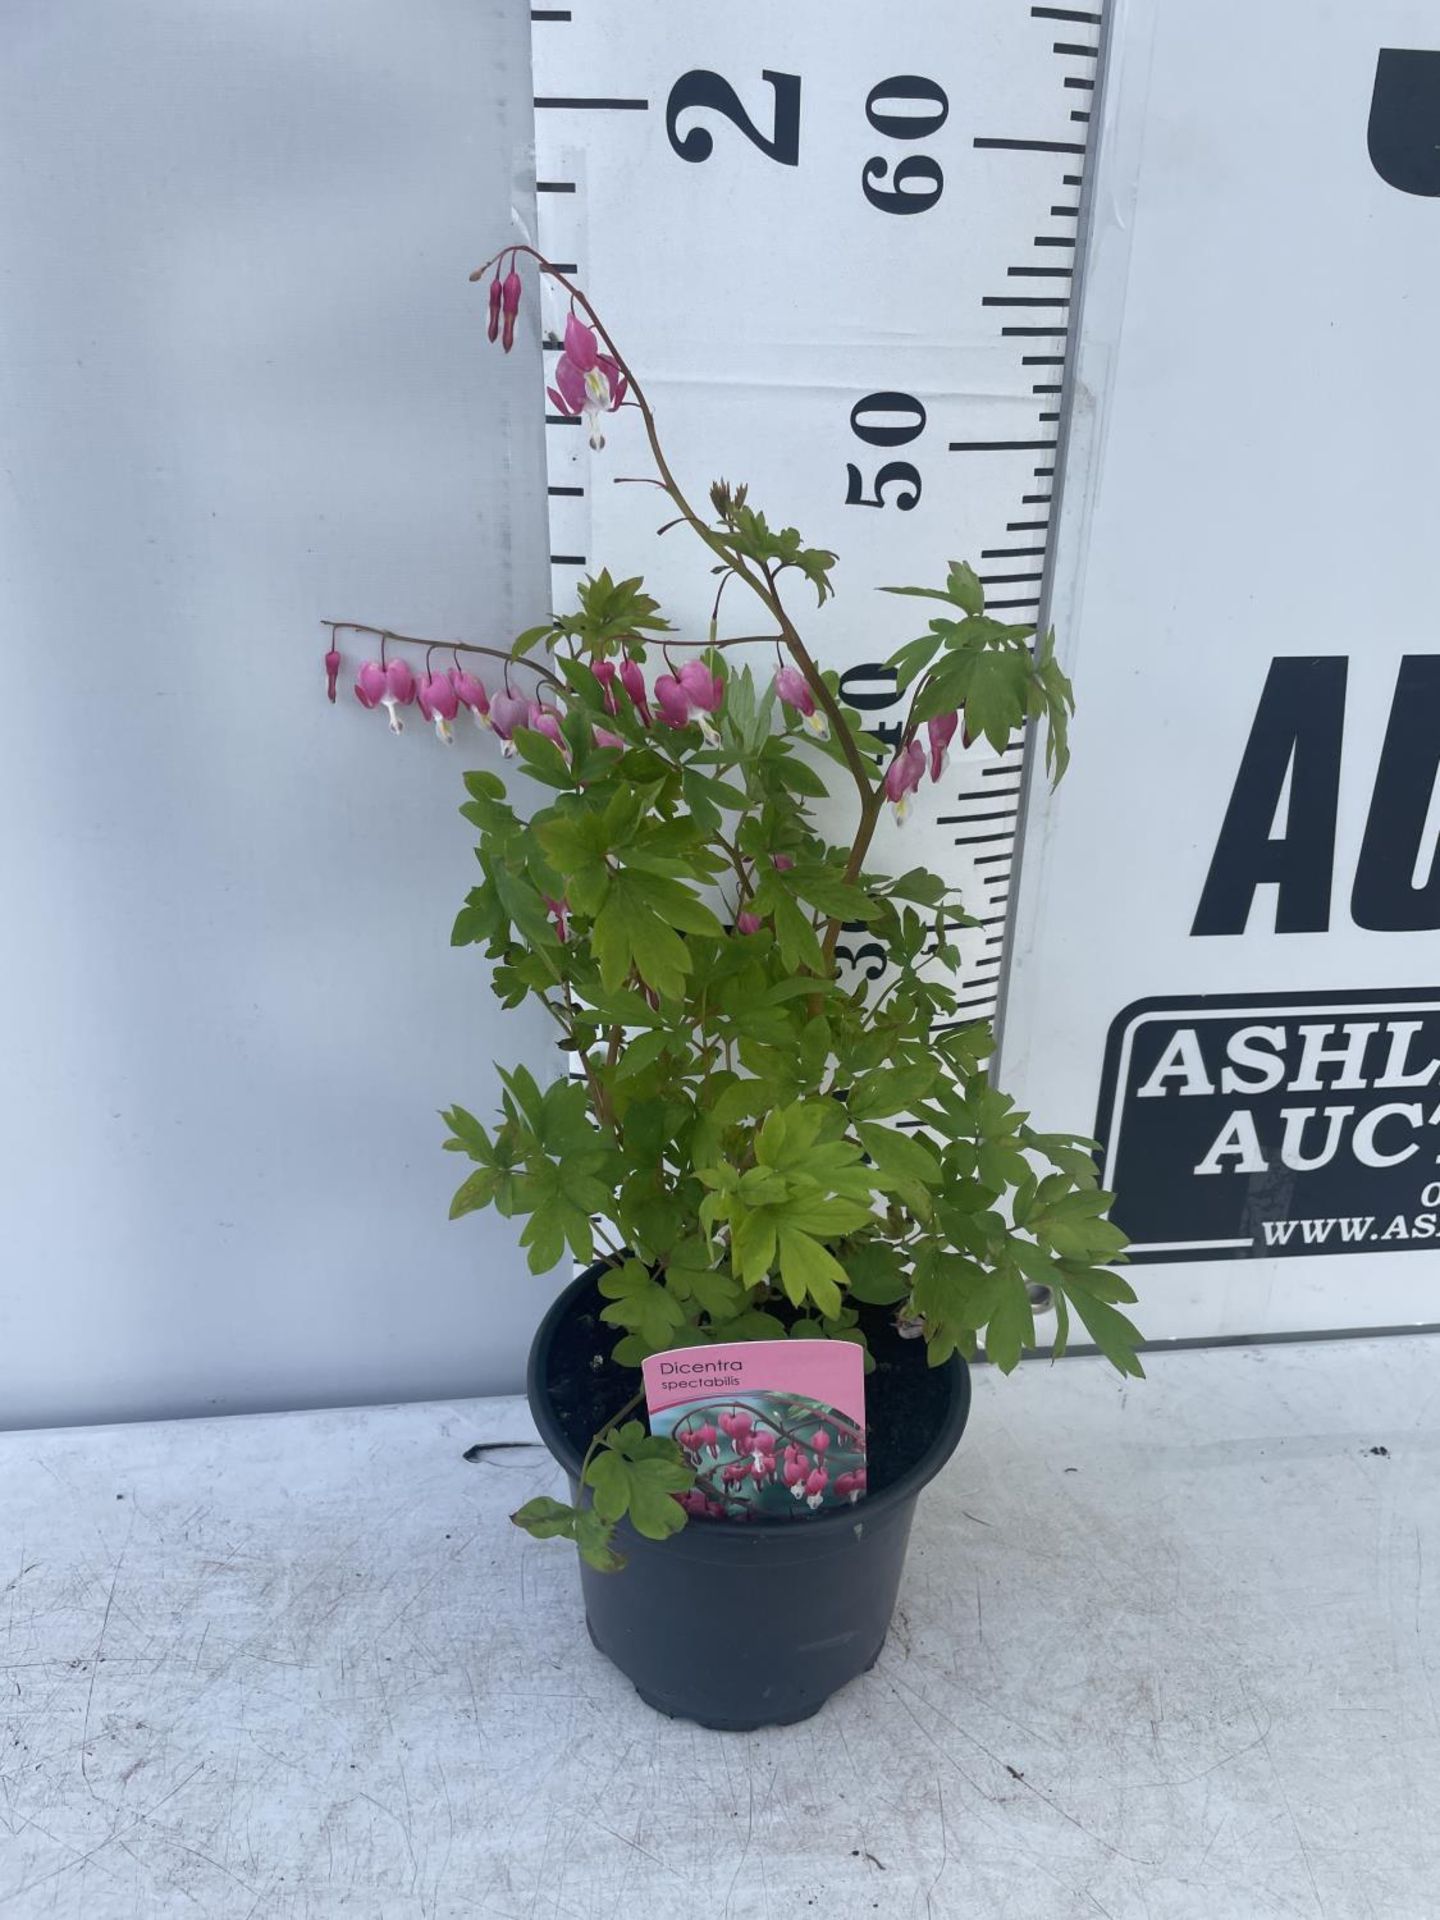 SIX DICENTRA SPECTABILIS BLEEDING HEART 50CM TALL TO BE SOLD FOR THE SIX PLUS VAT - Image 3 of 5